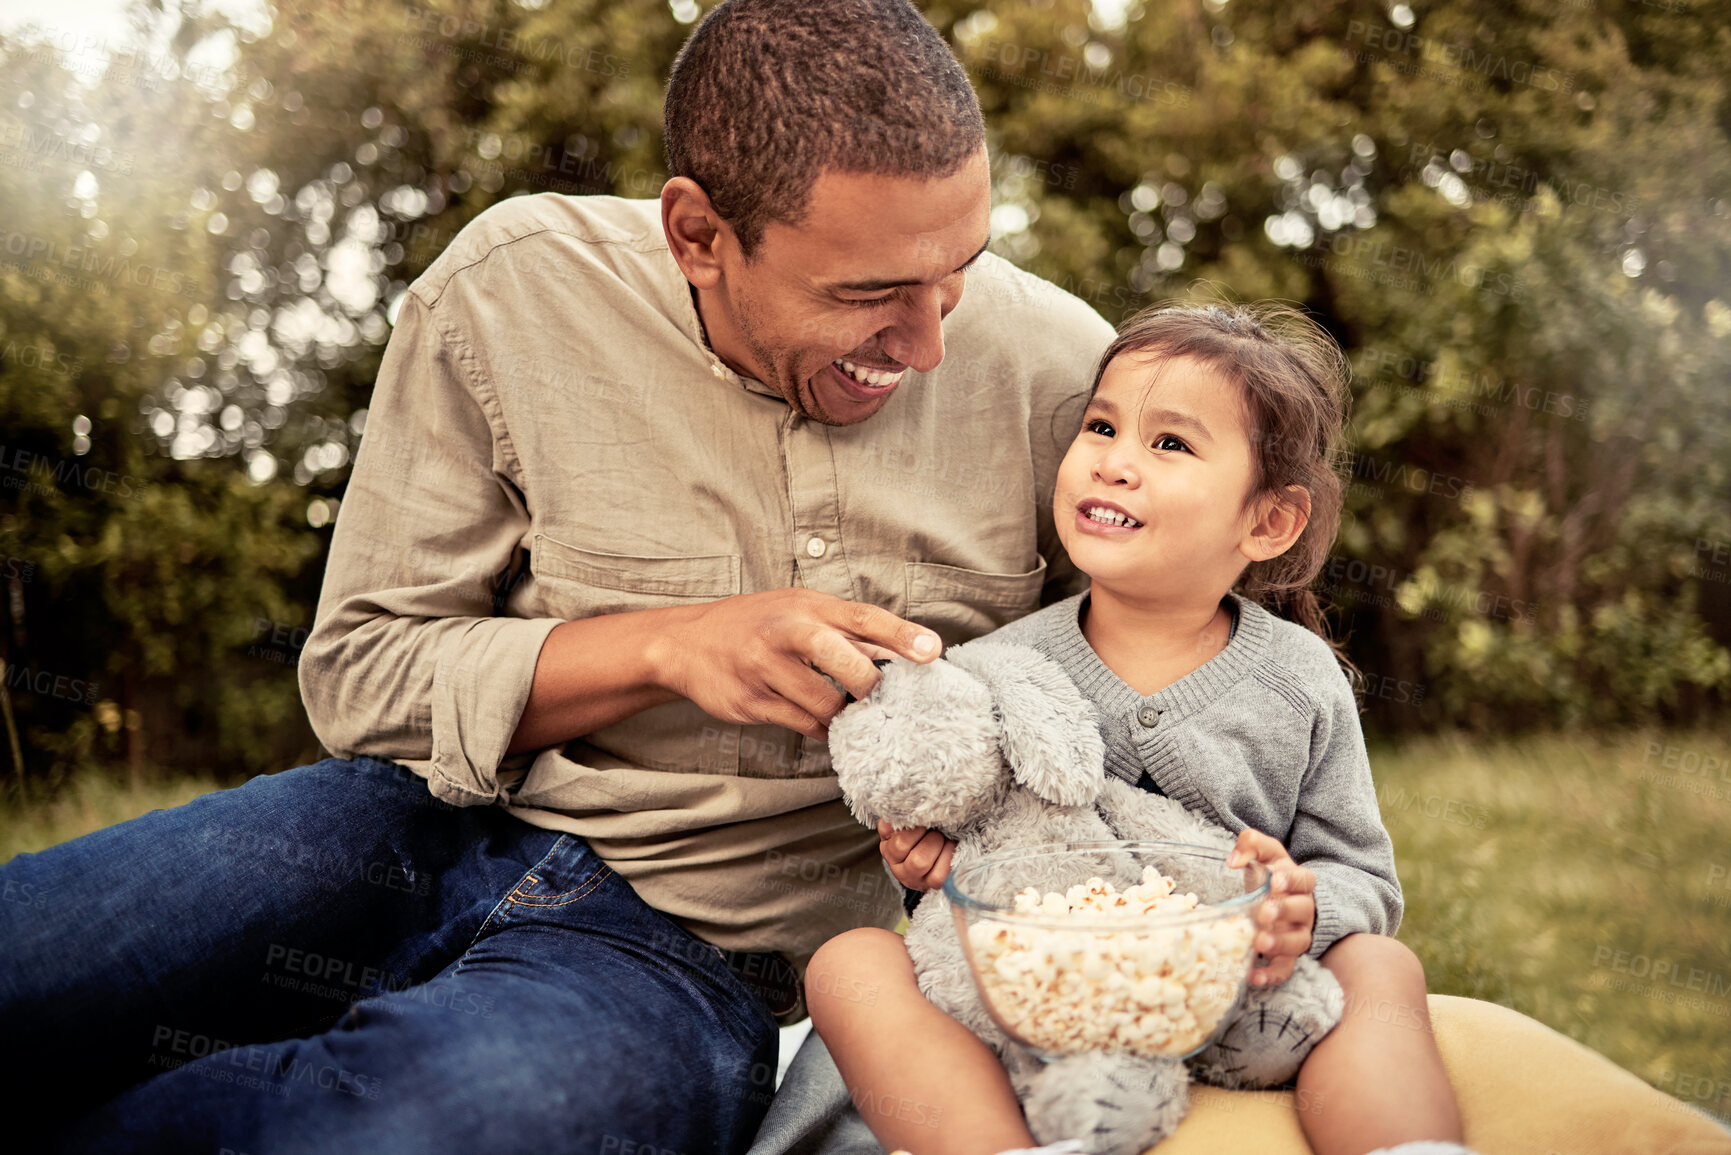 Buy stock photo Father, girl and popcorn eating of a happy child and parent outdoor laughing with a smile. Dad, happiness and kid with food hug together with bonding, quality time and nature experience having fun